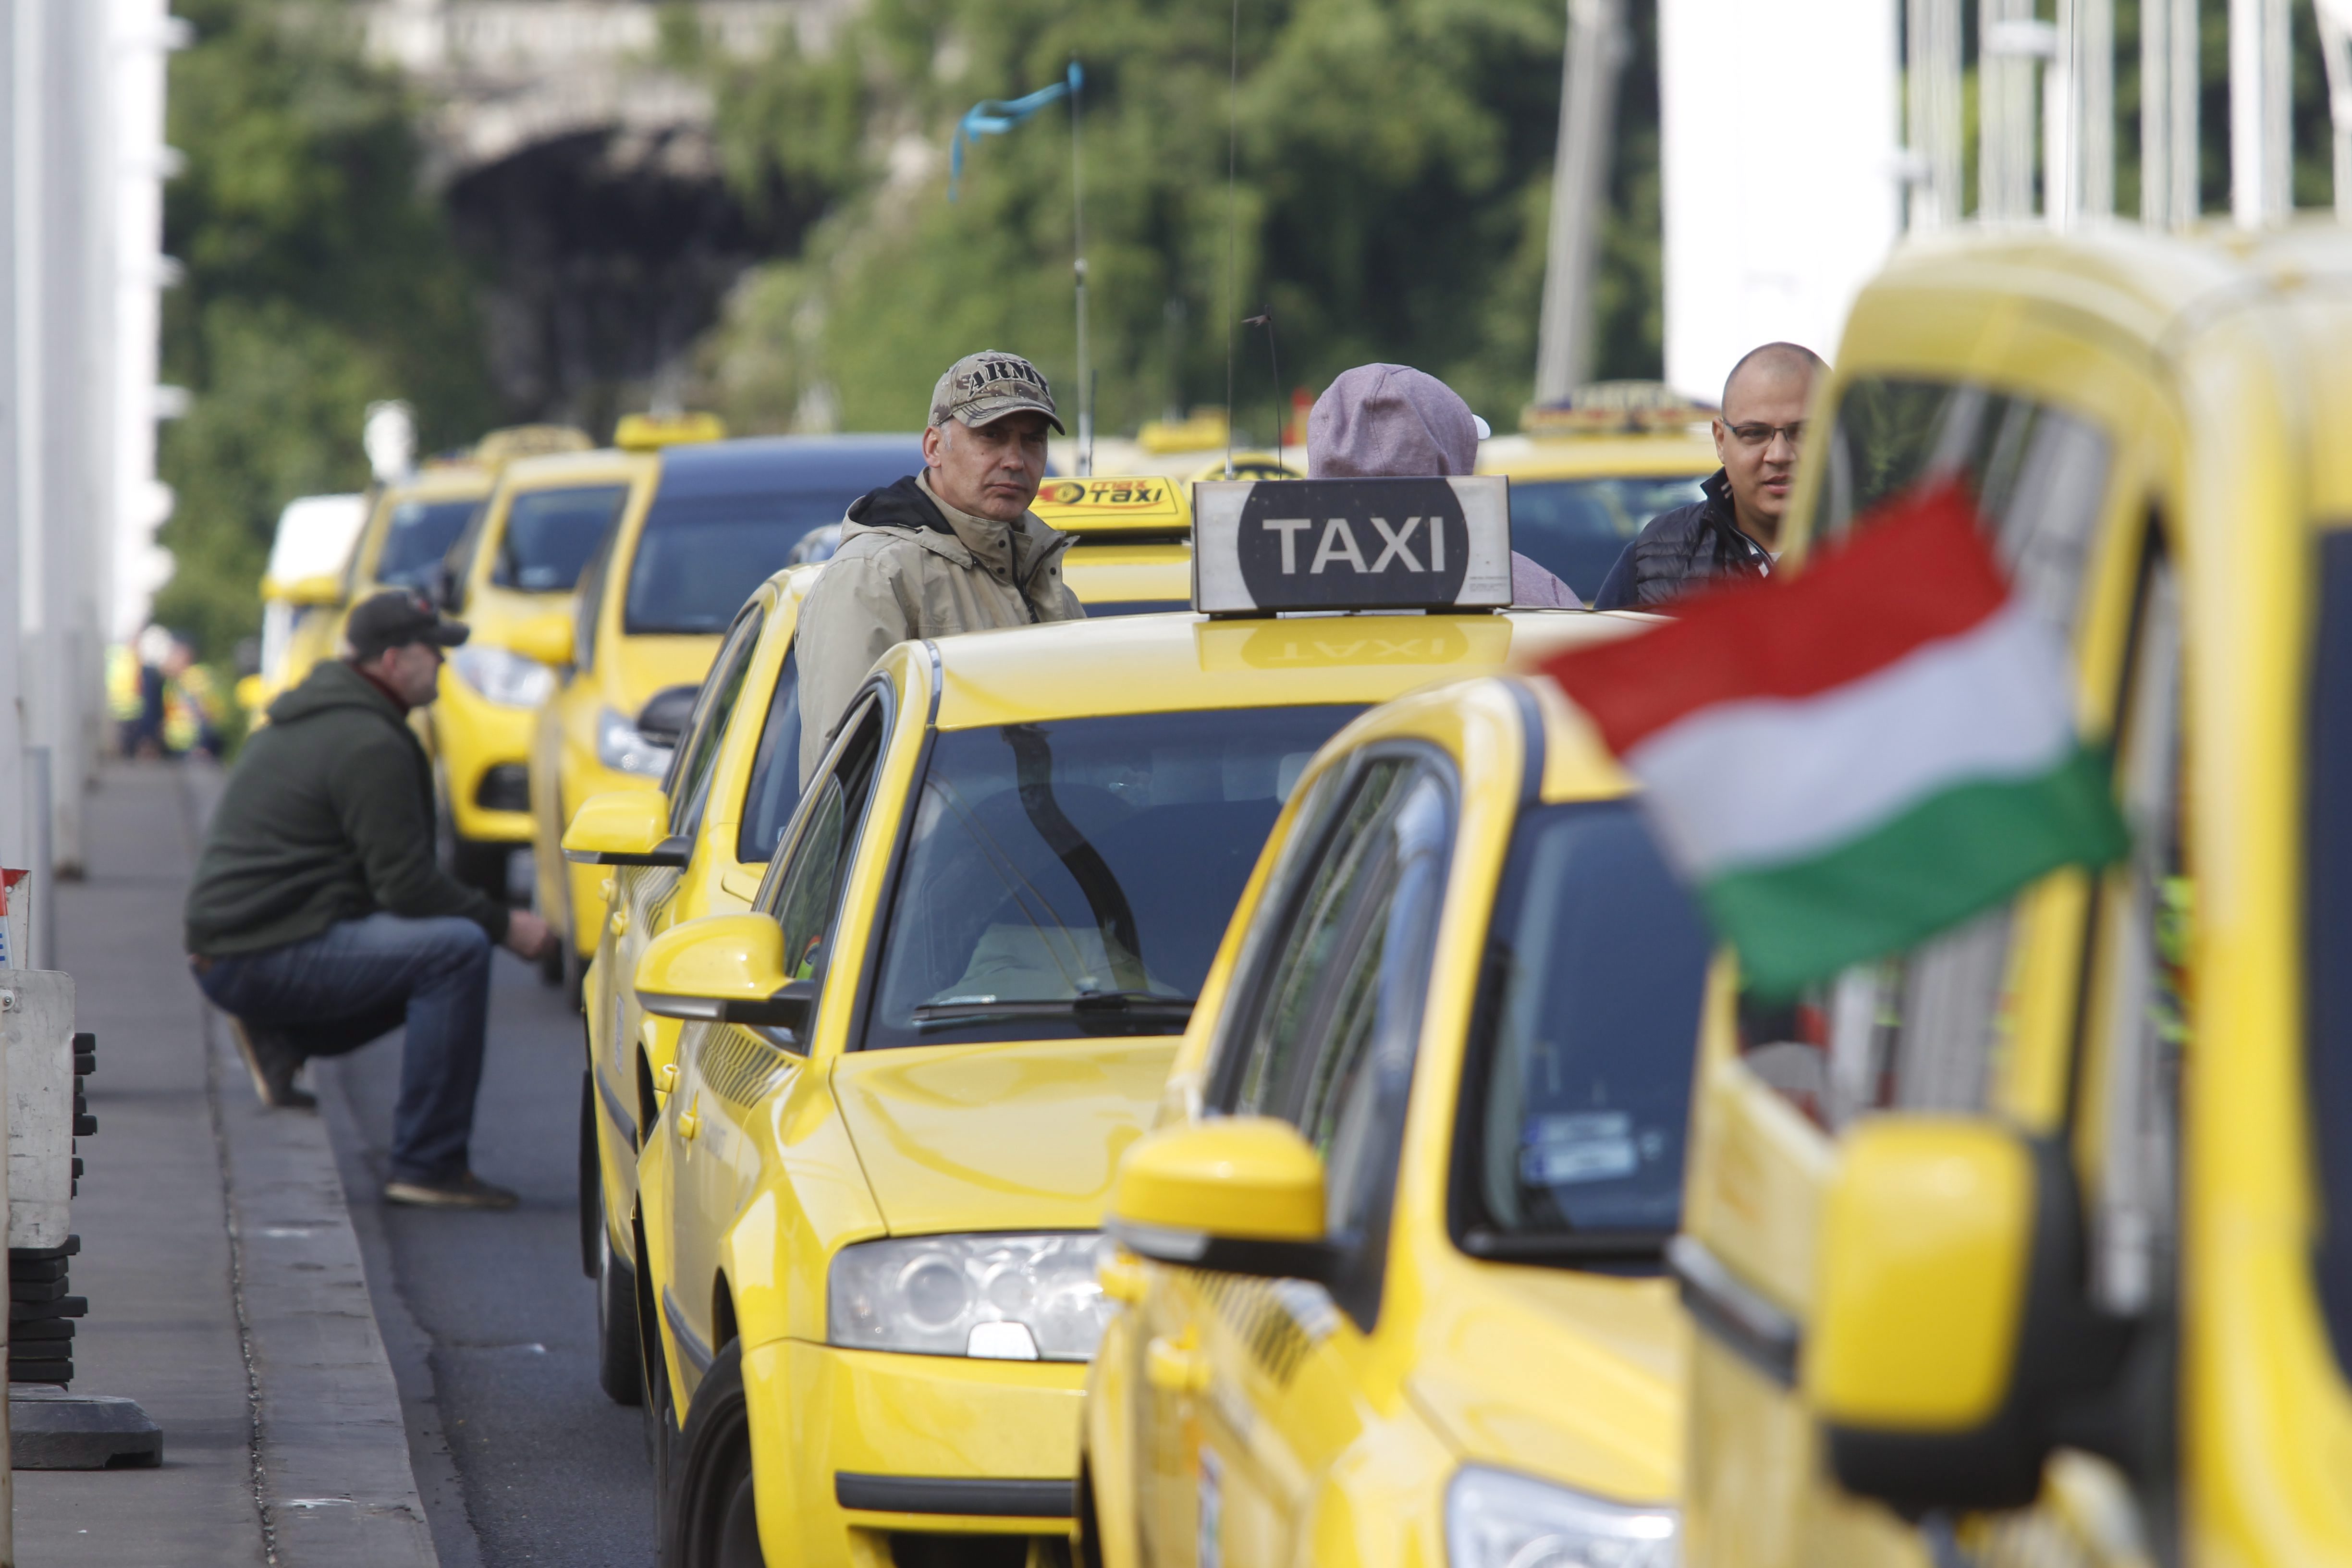 Taxi Drivers Demonstrate for Fare Rise